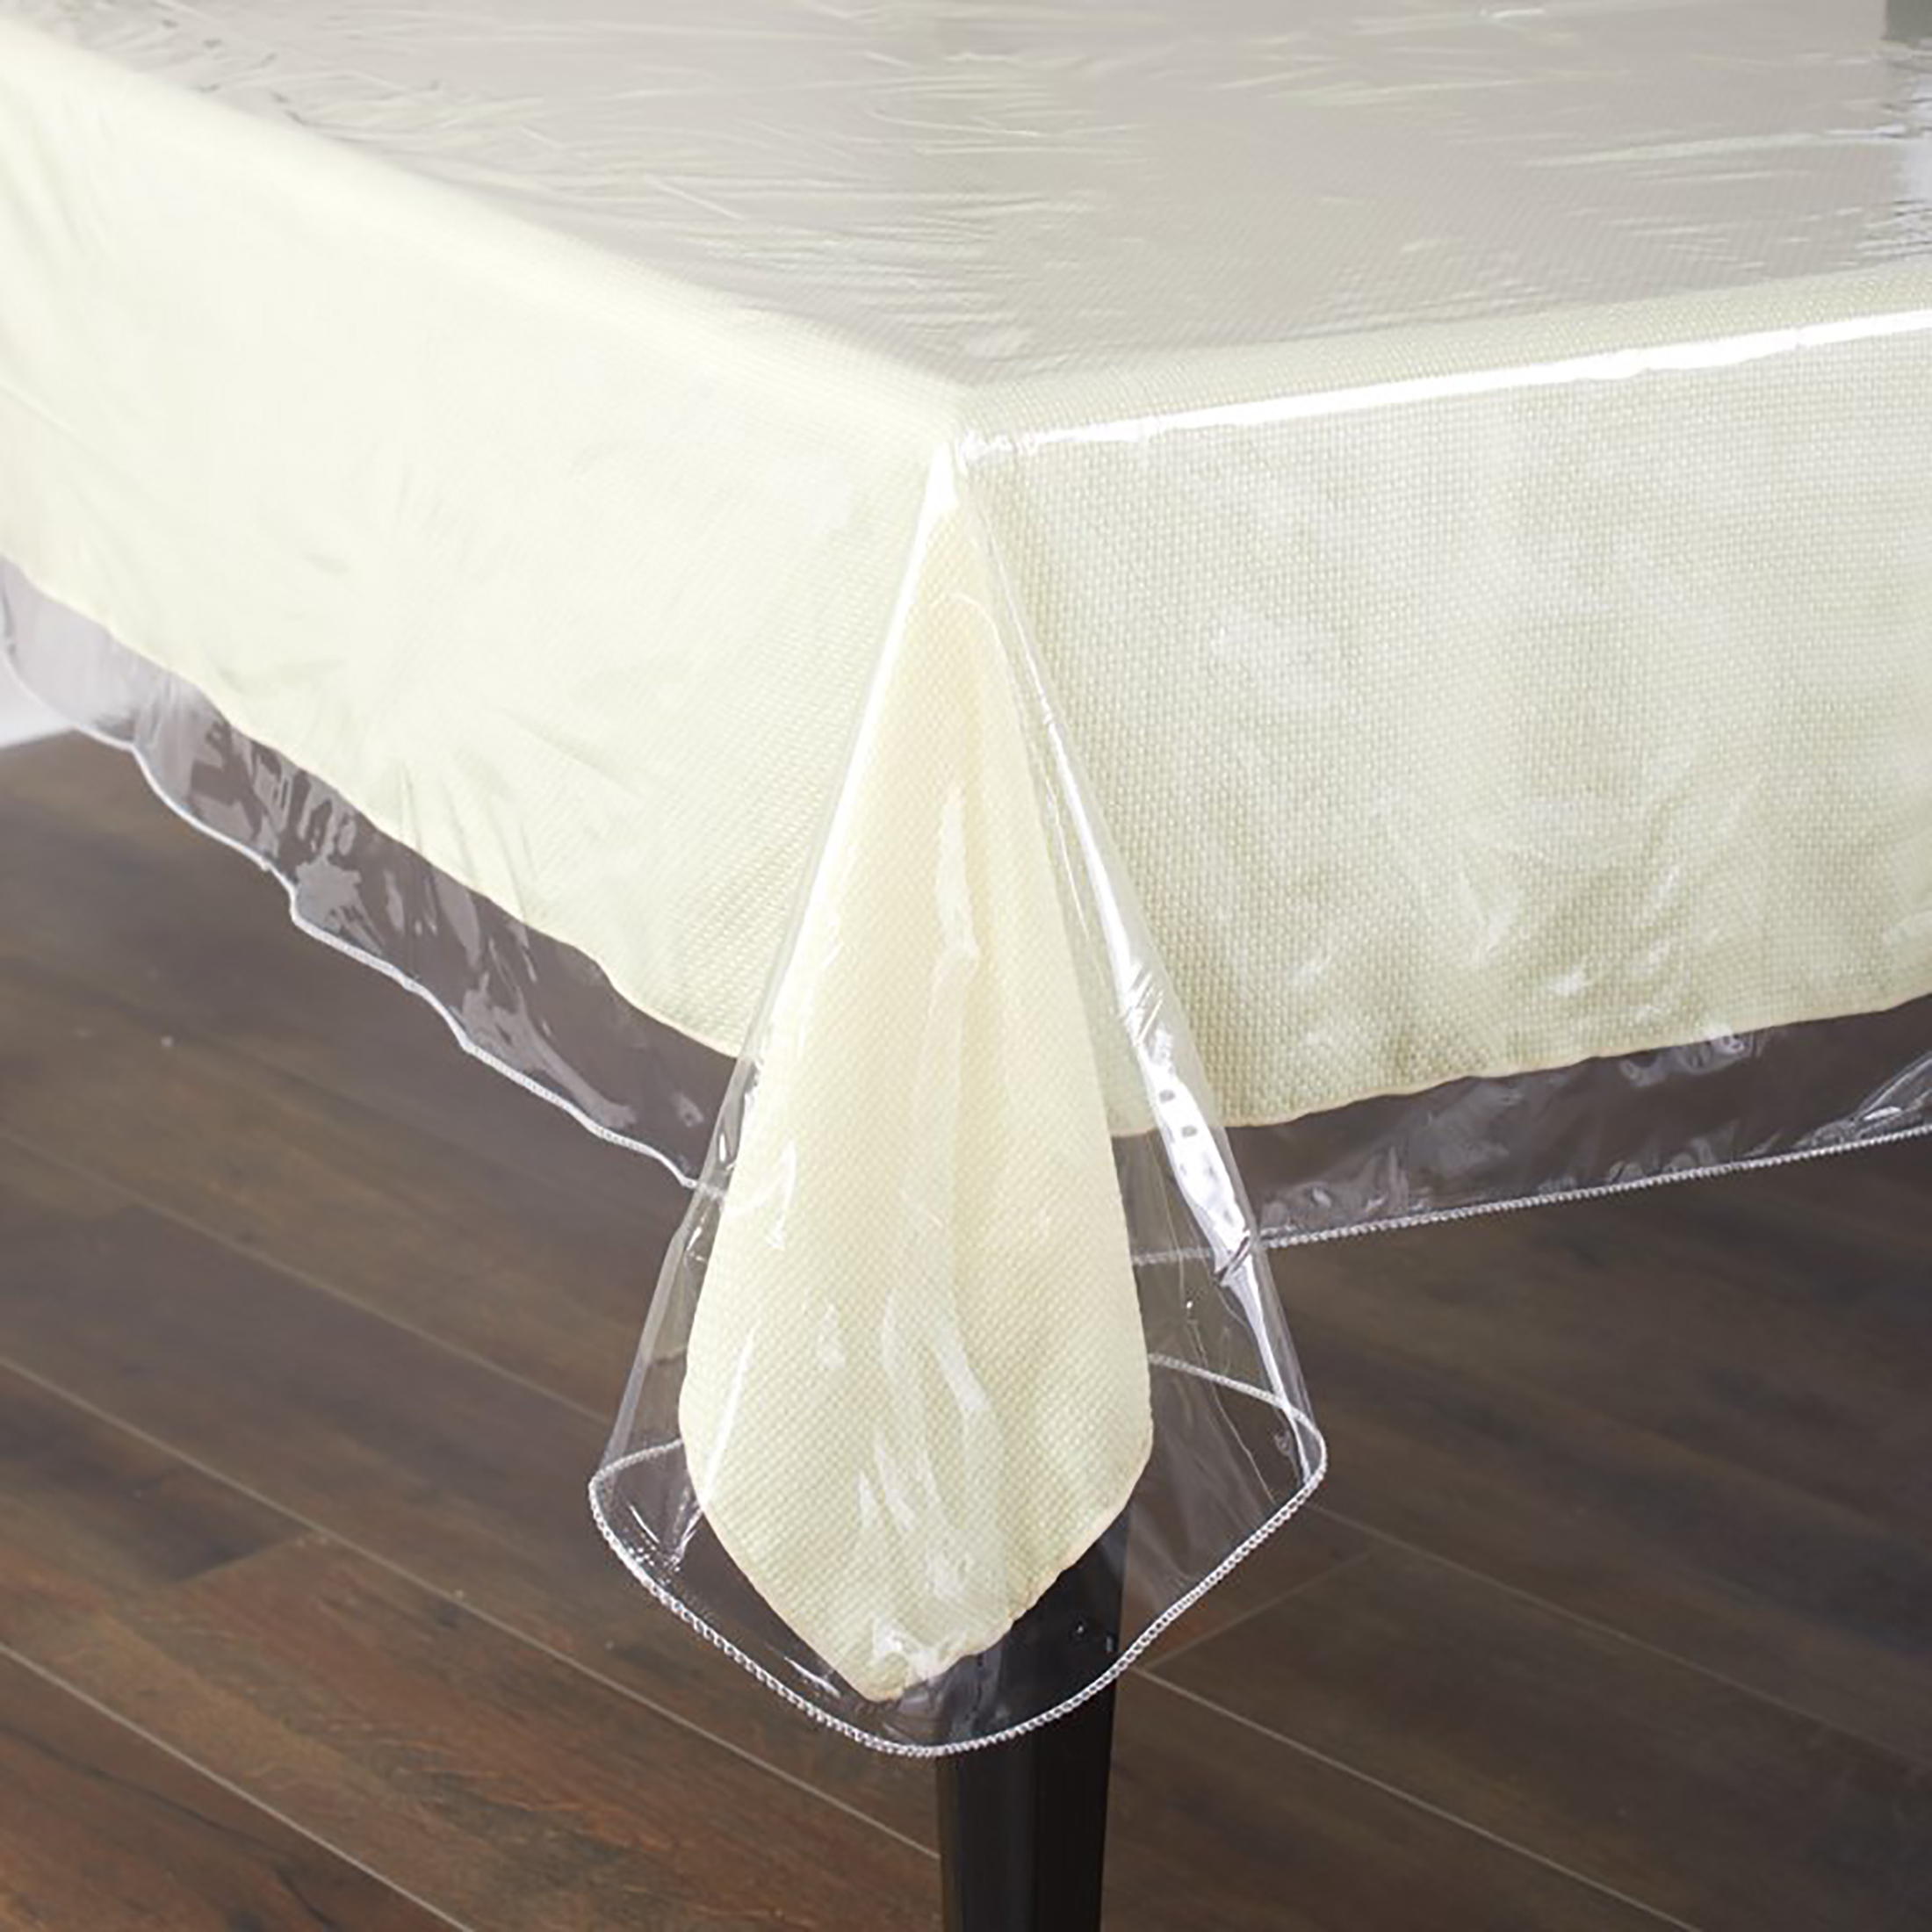 Waterproof Window Clear Vinyl Tablecloth Protector Oblong - 54x54